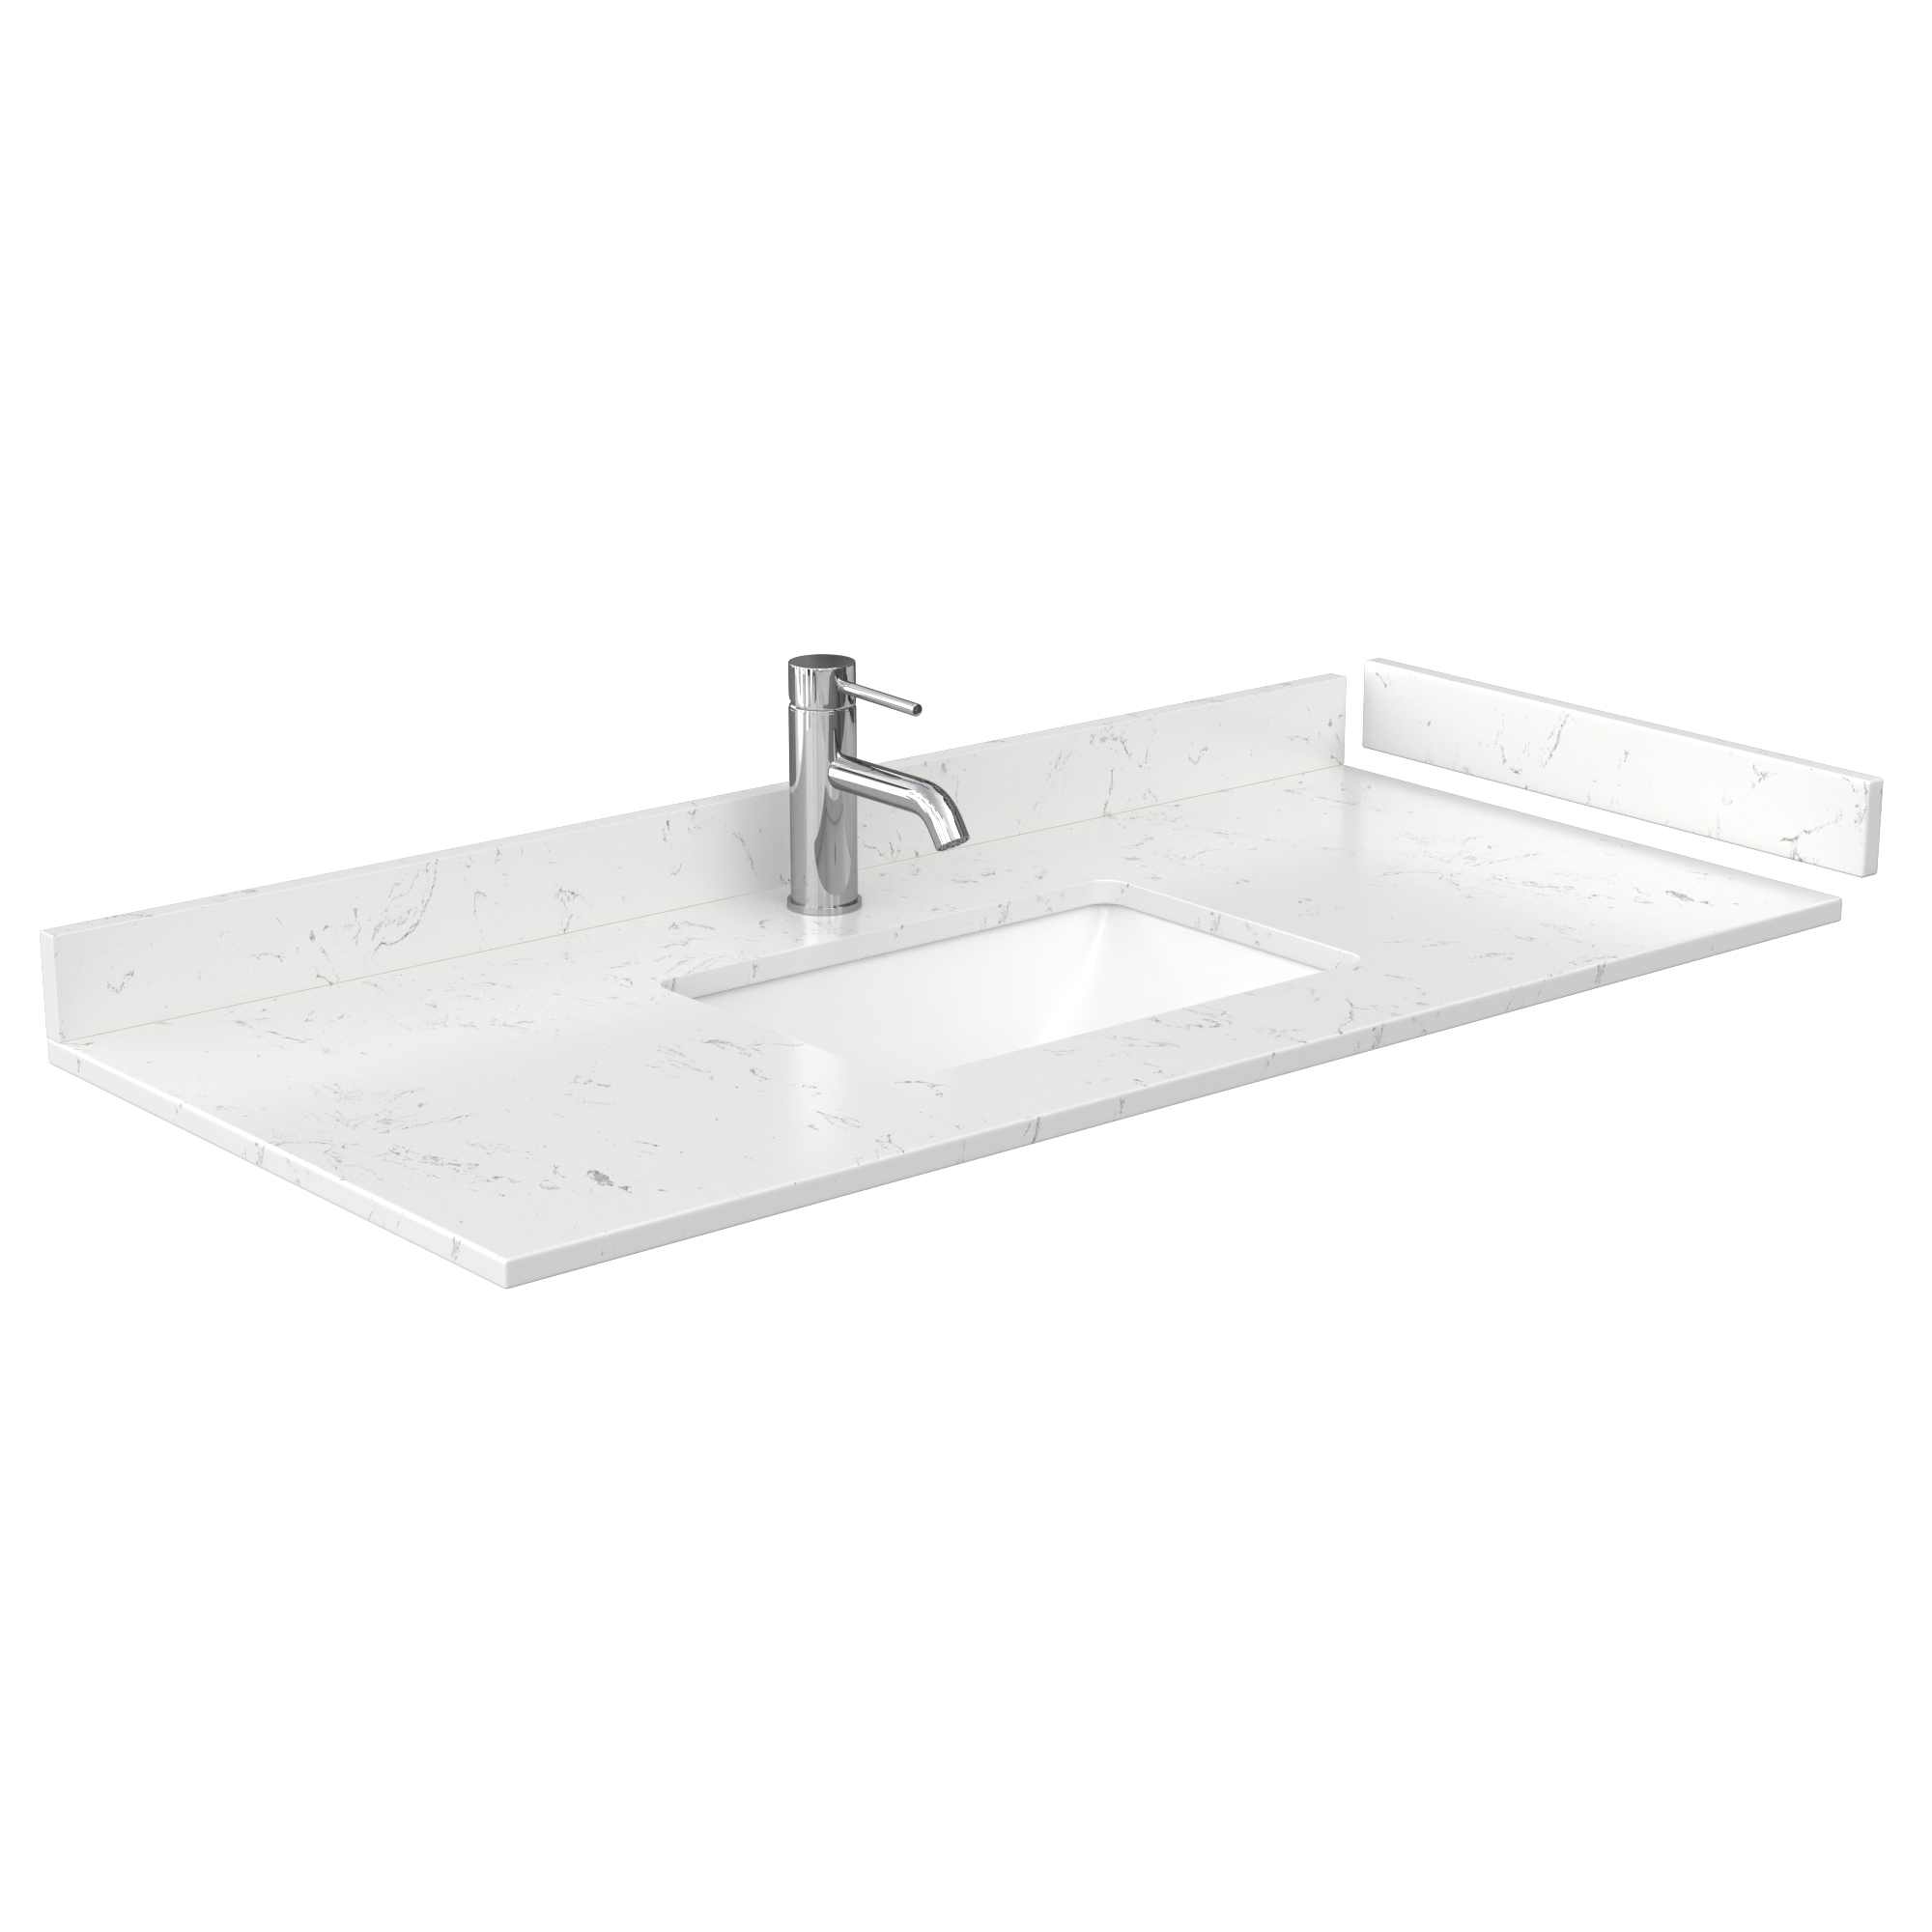 48" Single Countertop - Light-Vein Carrara Cultured Marble with Undermount Square Sink - Include Backsplash and Sidesplash WC-VCA-48-SGL-TOP-UMSQ-CC2